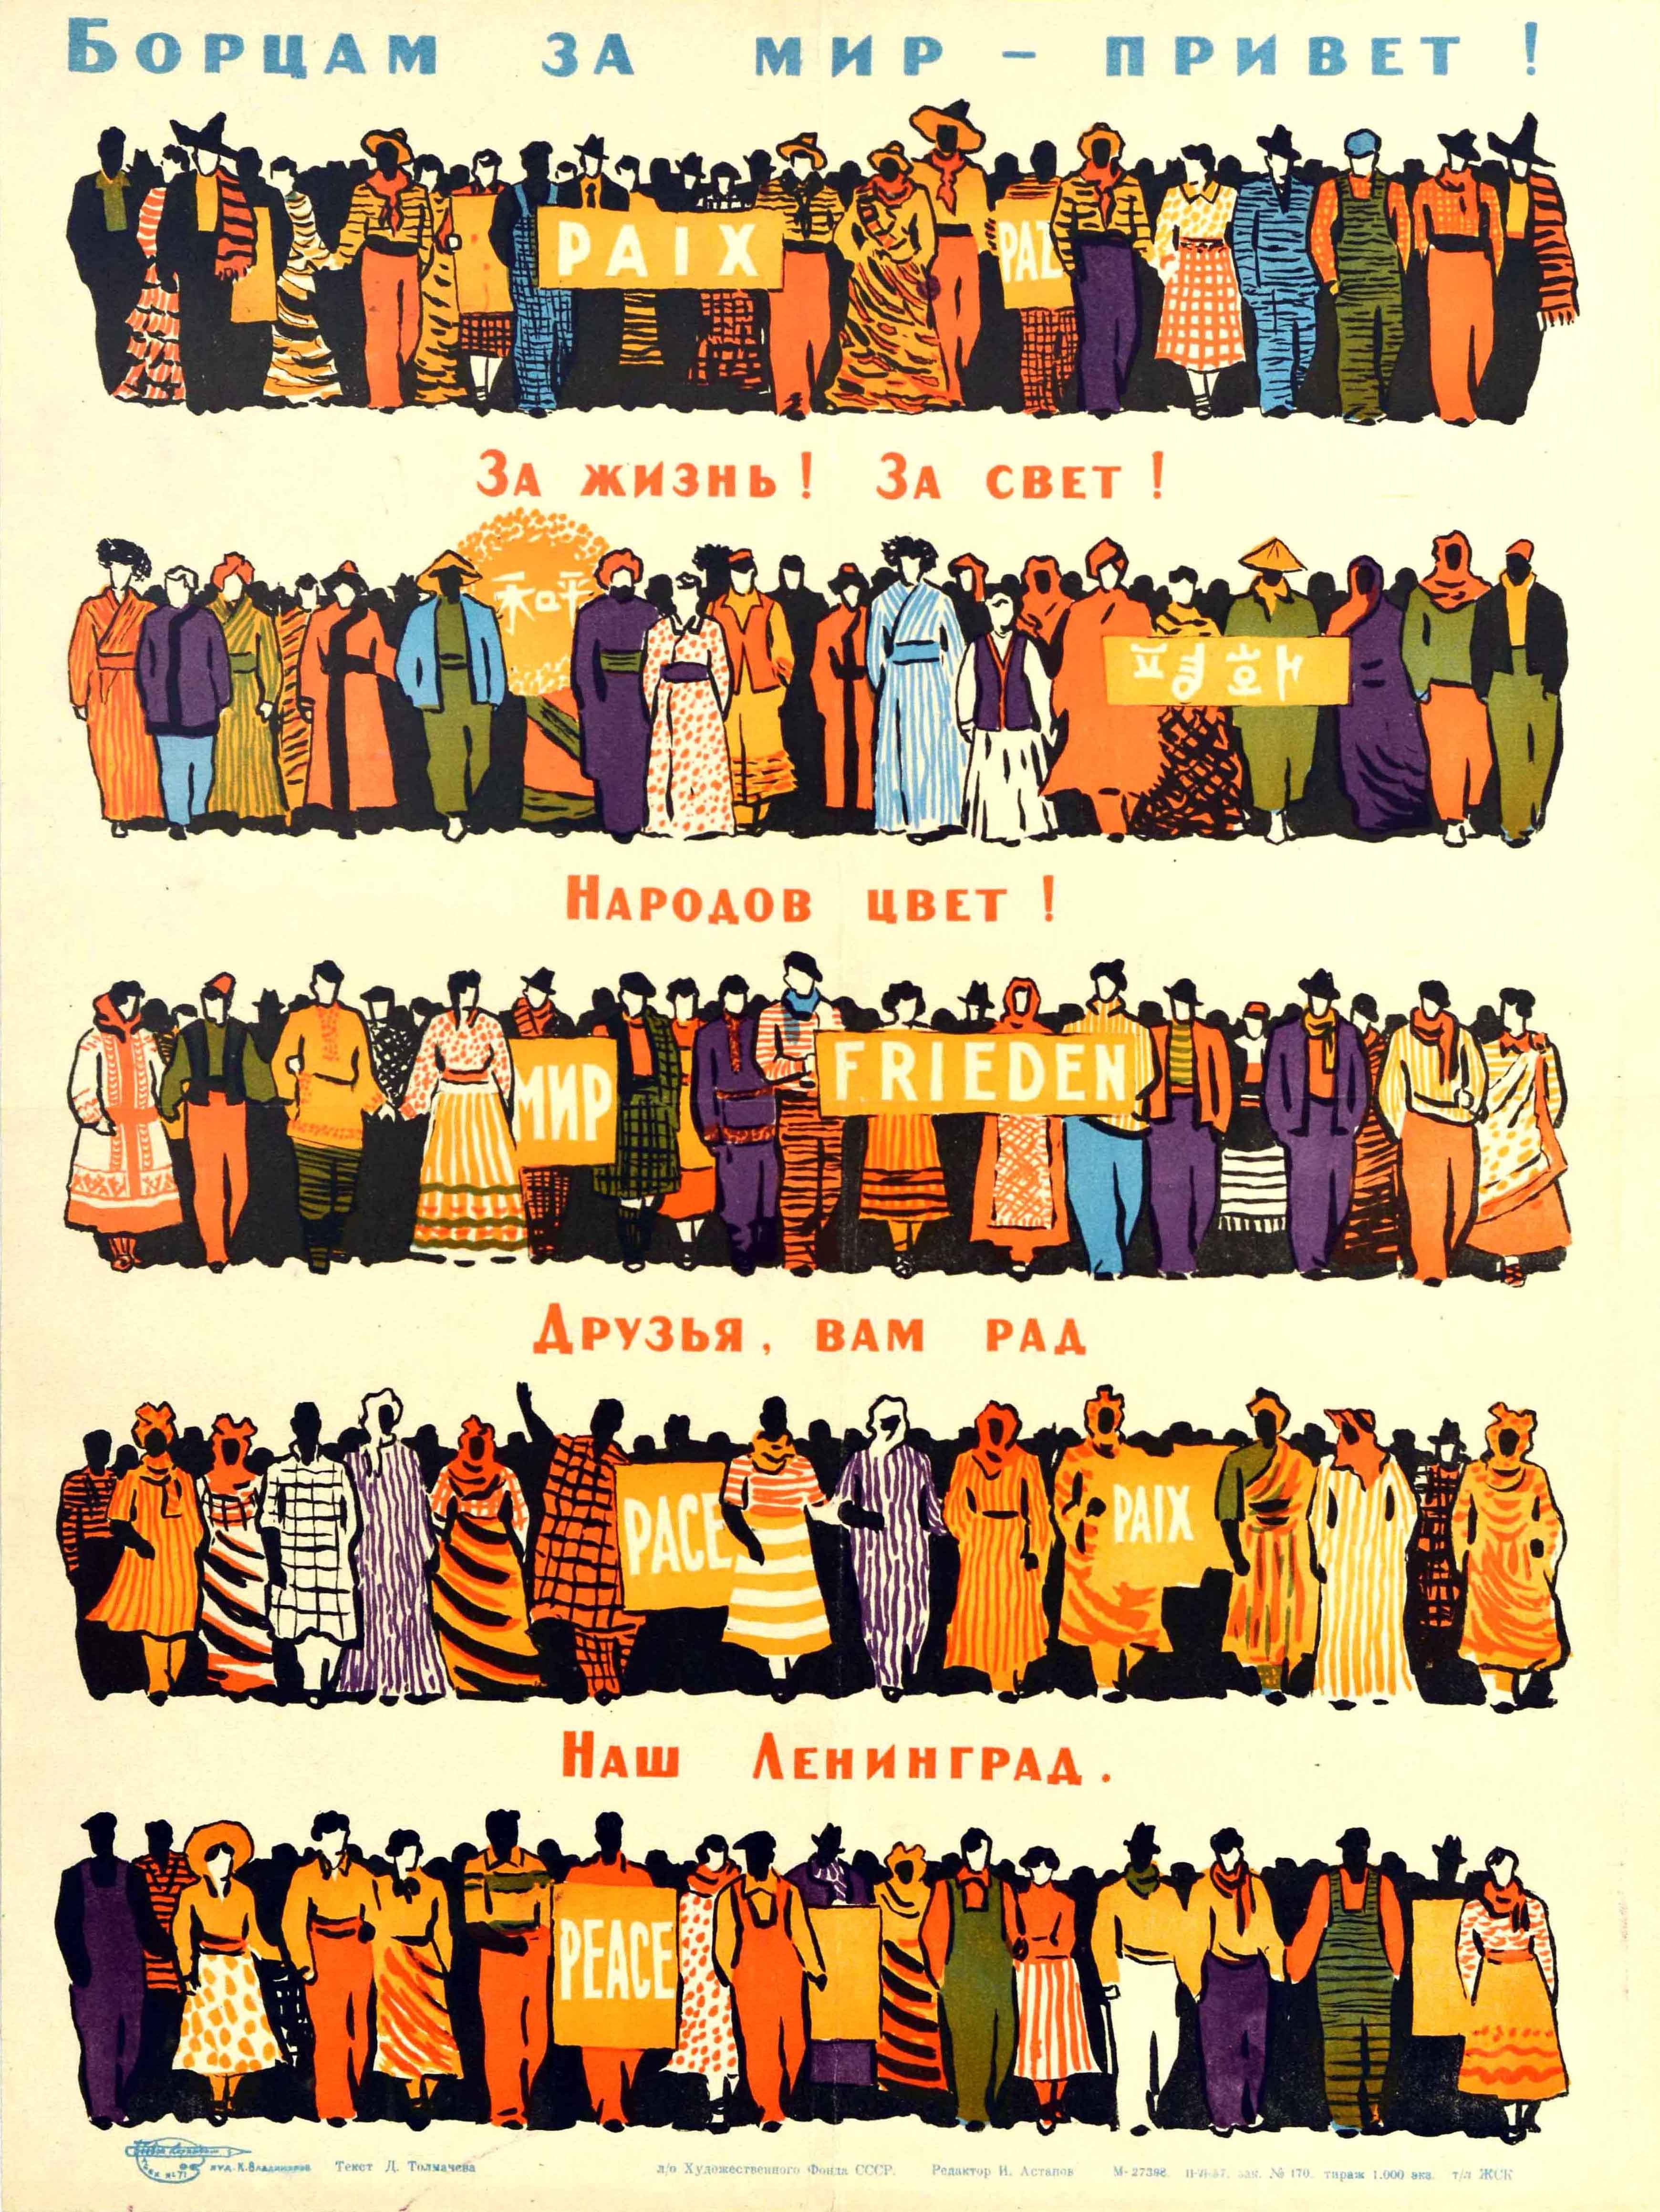 Original vintage Soviet propaganda poster featuring an illustration of the international community walking forward together depicting people from all nations of the world in their traditional costumes holding up banners that read Peace in French,